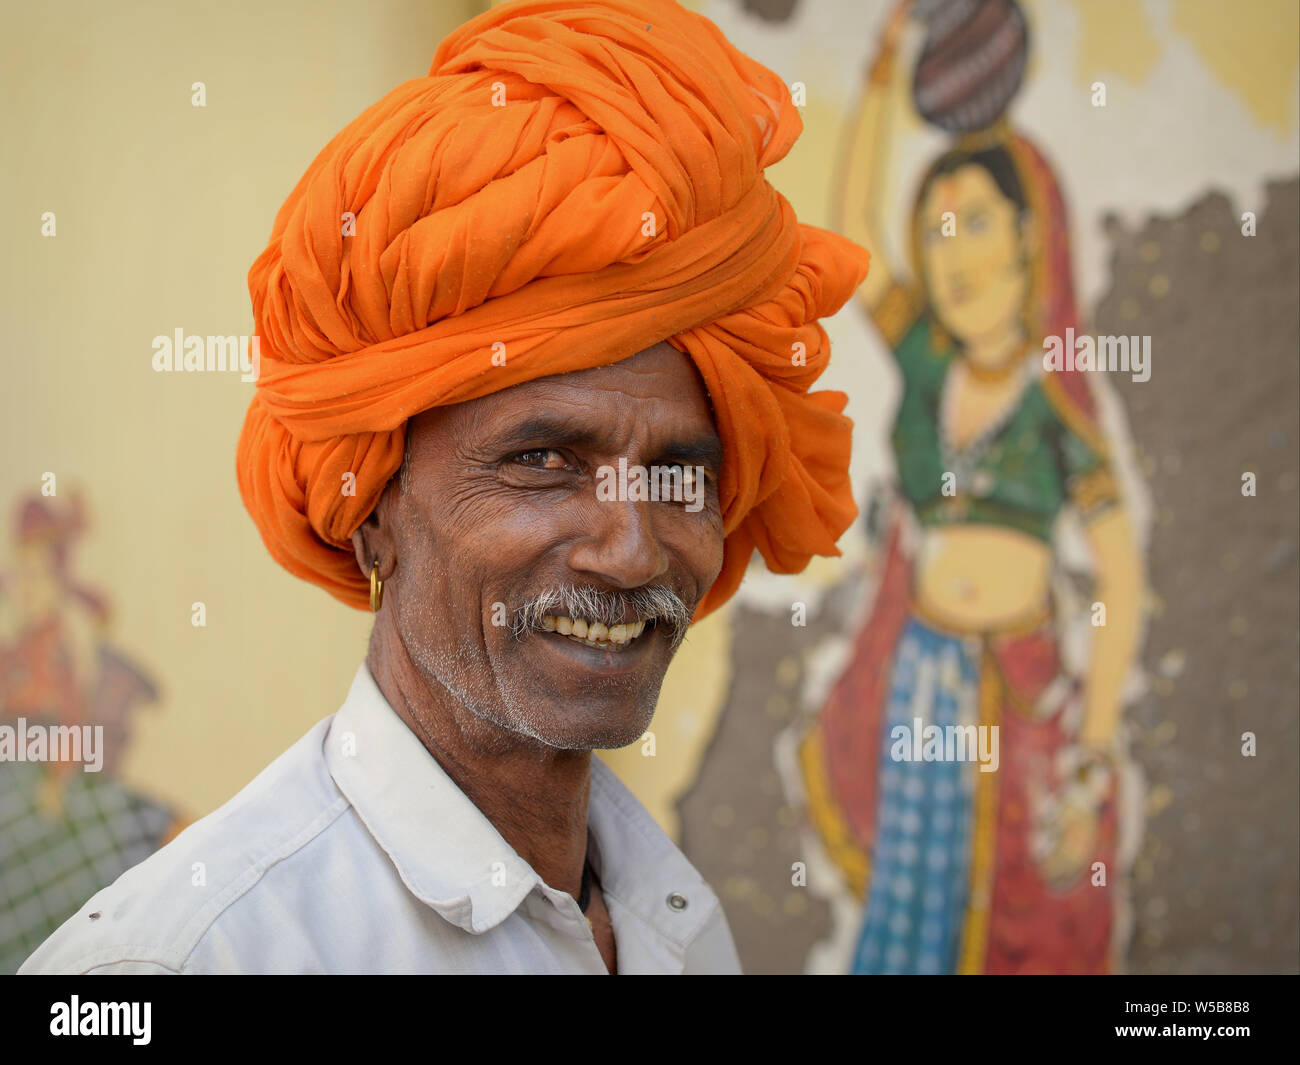 Indian Rajasthani man with an orange Rajasthani turban (pagari) poses for the camera in front of a mural. Stock Photo